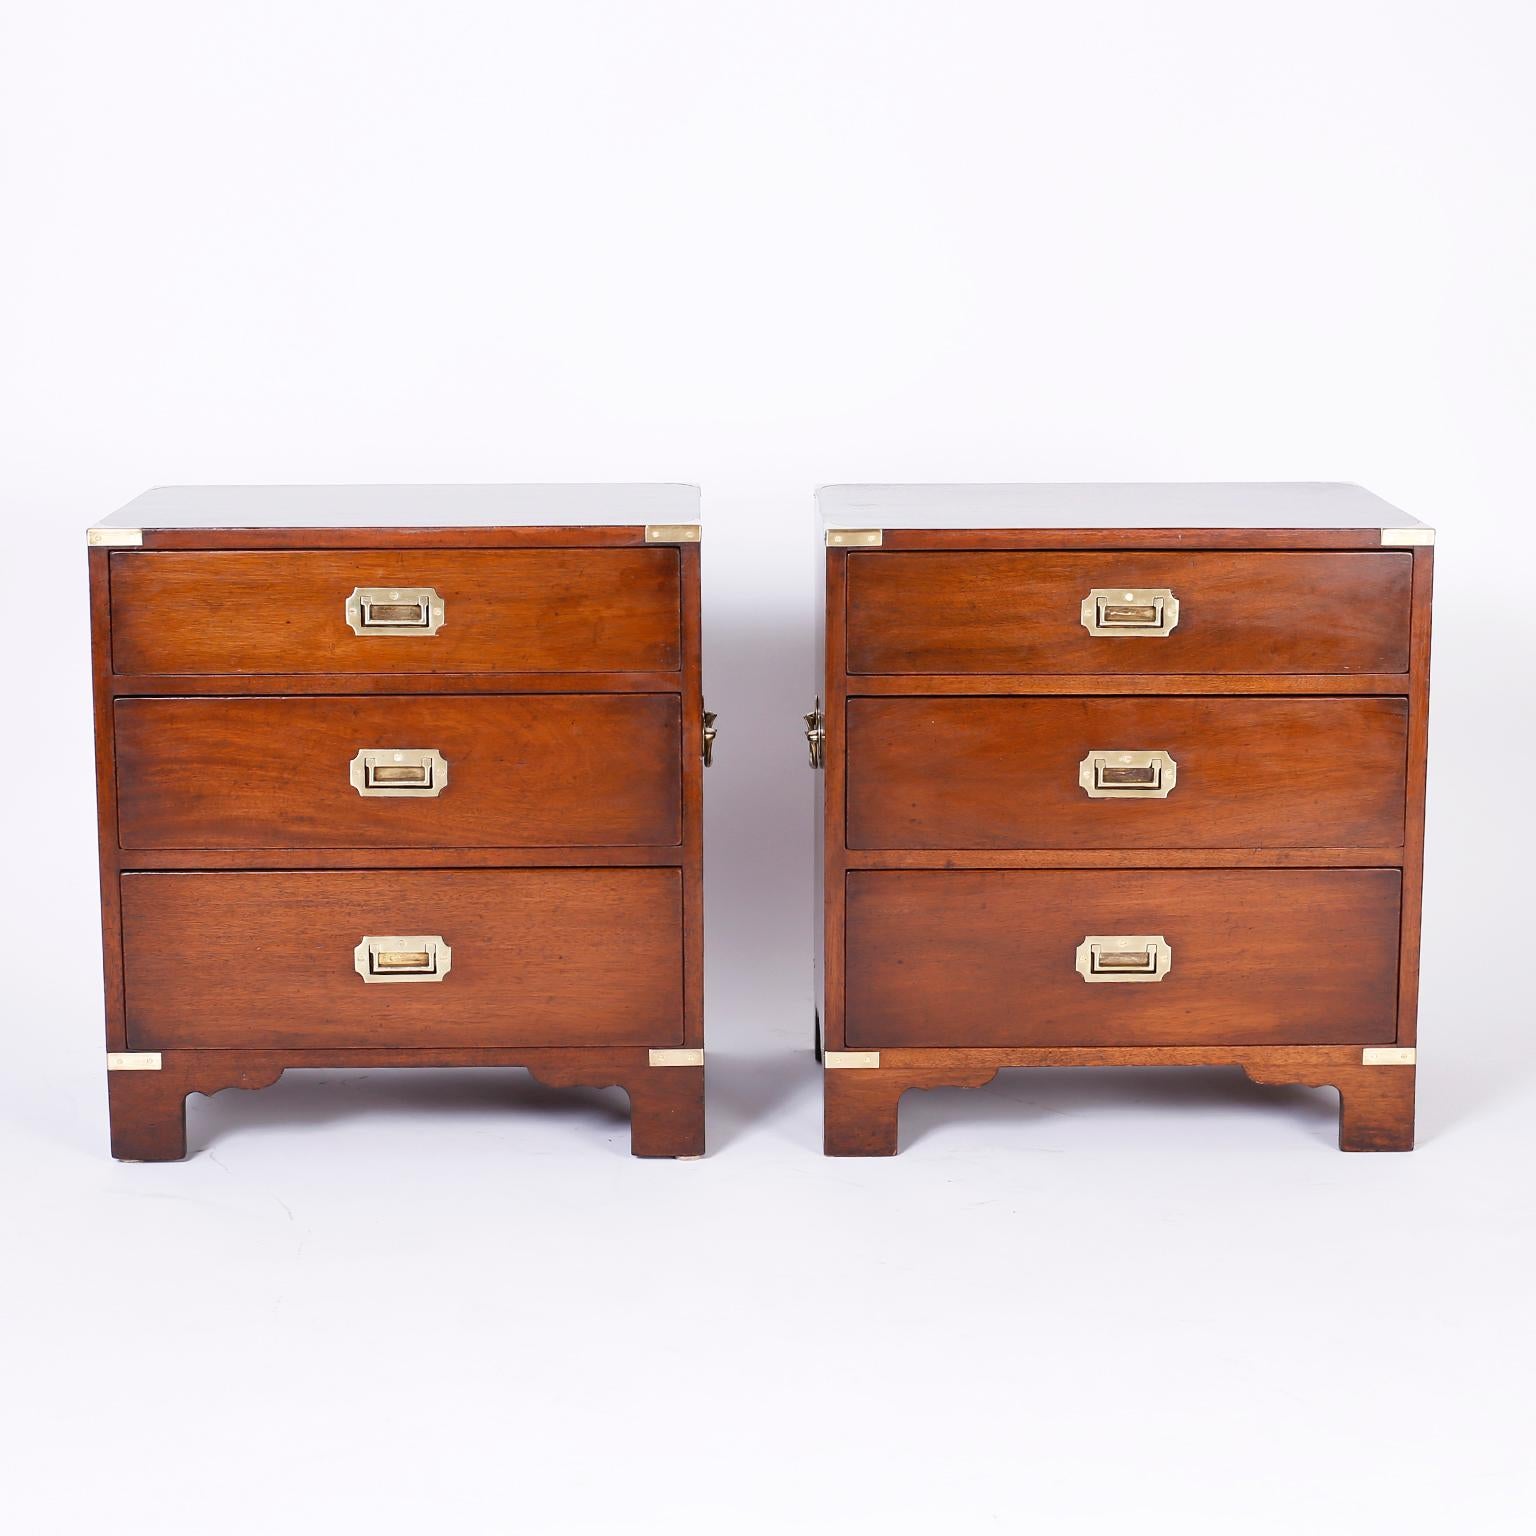 Handsome pair of midcentury campaign style three drawer nightstands crafted in mahogany with brass hardware and bracket feet.